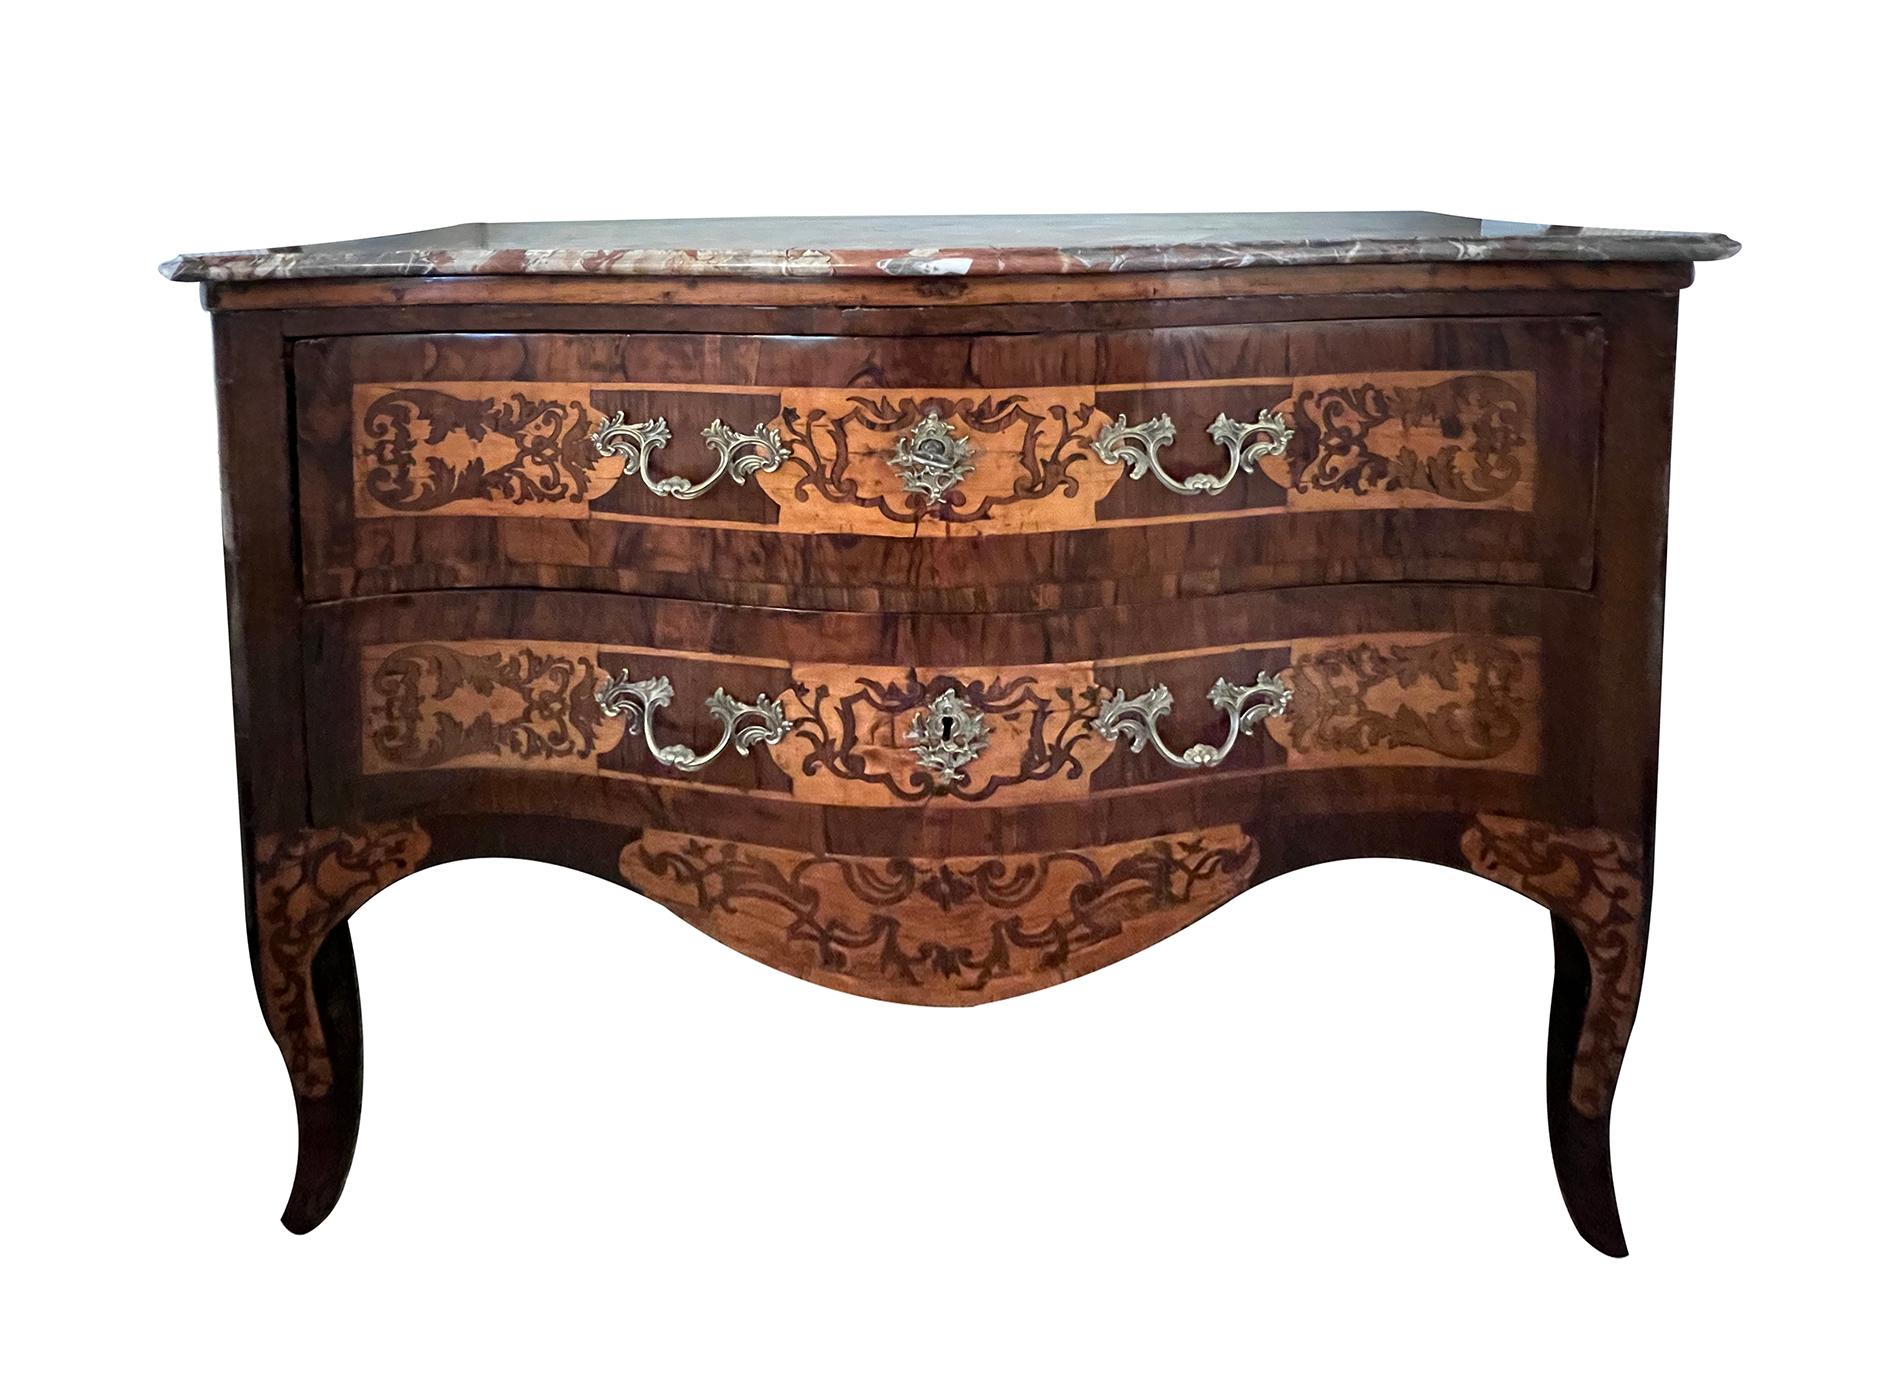 Italian Rococo Serpentine Form 2-Drawer Inlaid Chest with Marble Top In Good Condition For Sale In San Francisco, CA